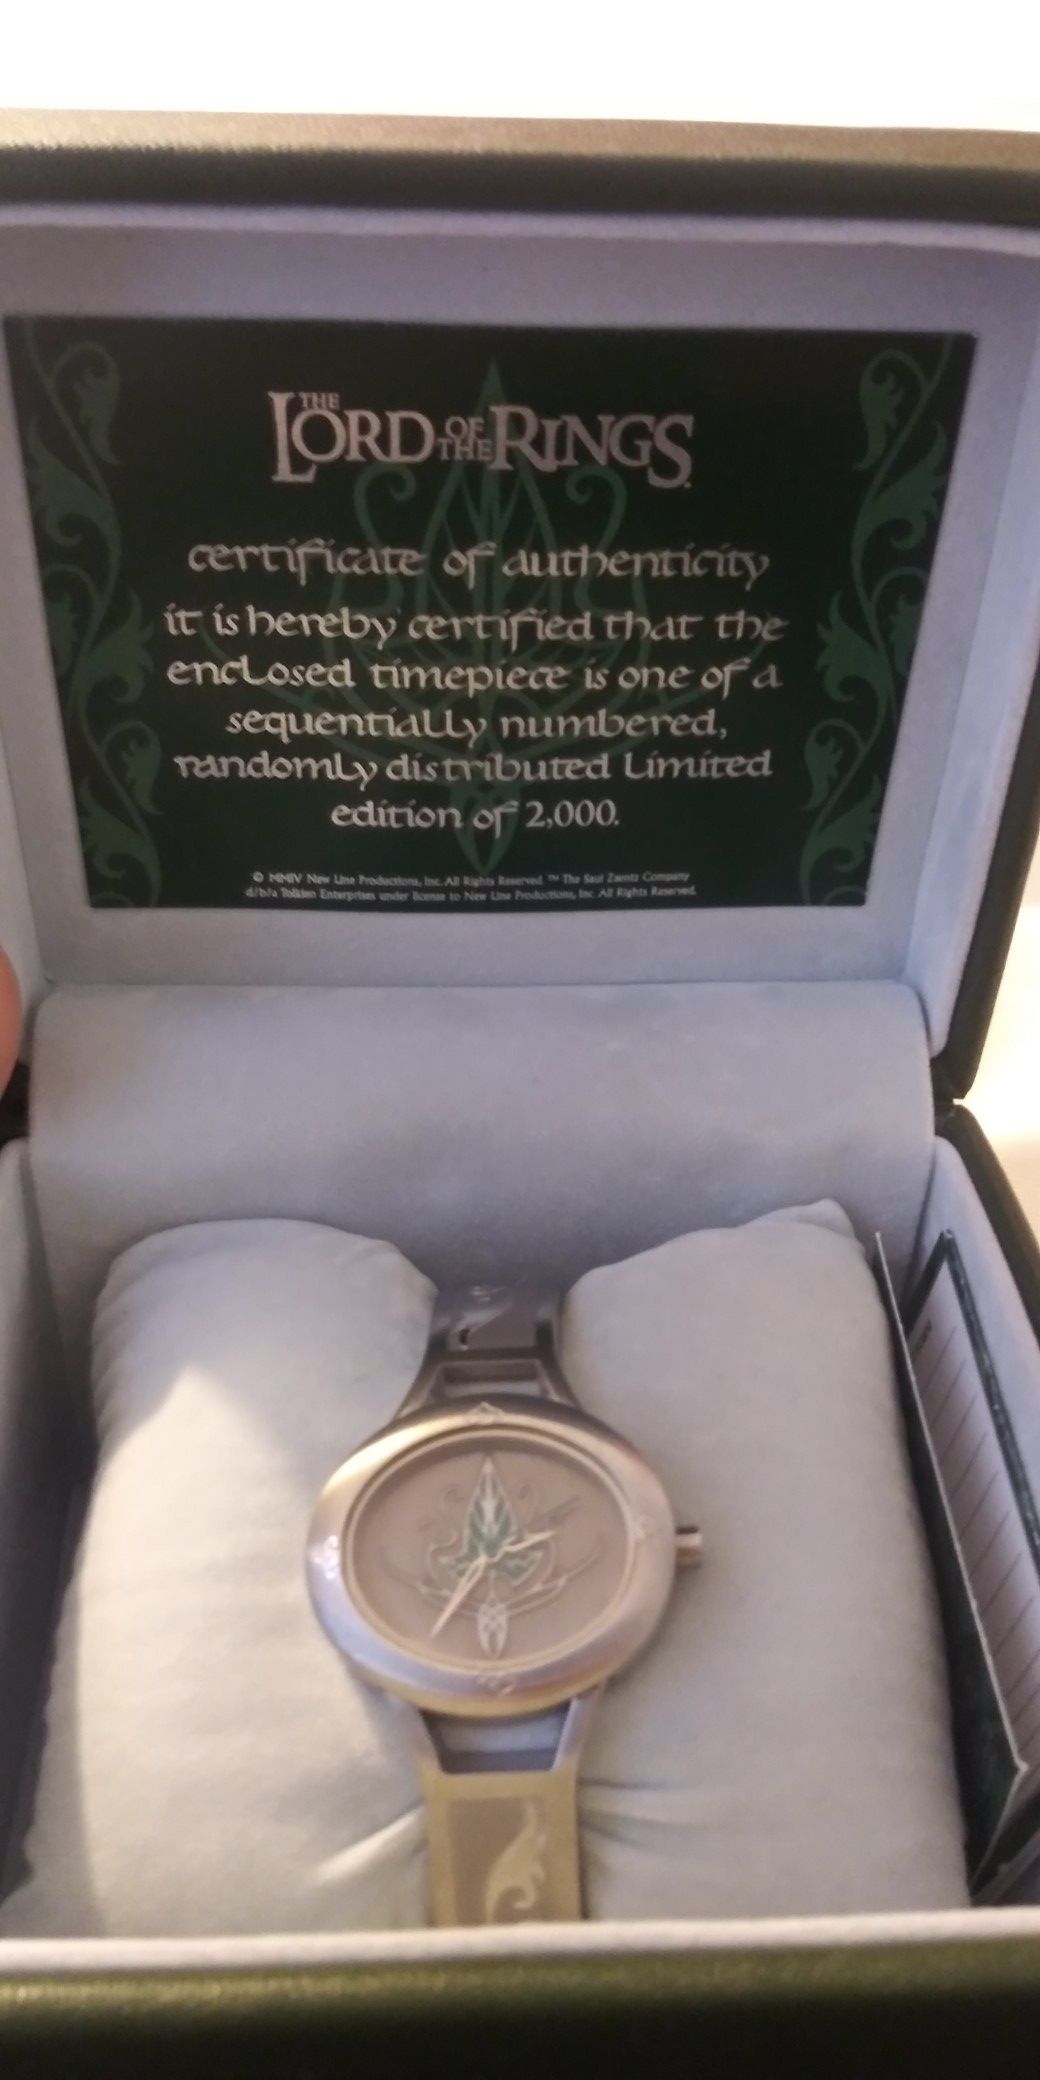 NIB Fossil Lord Of The Rings Limited Edition Watch Elven Arwen